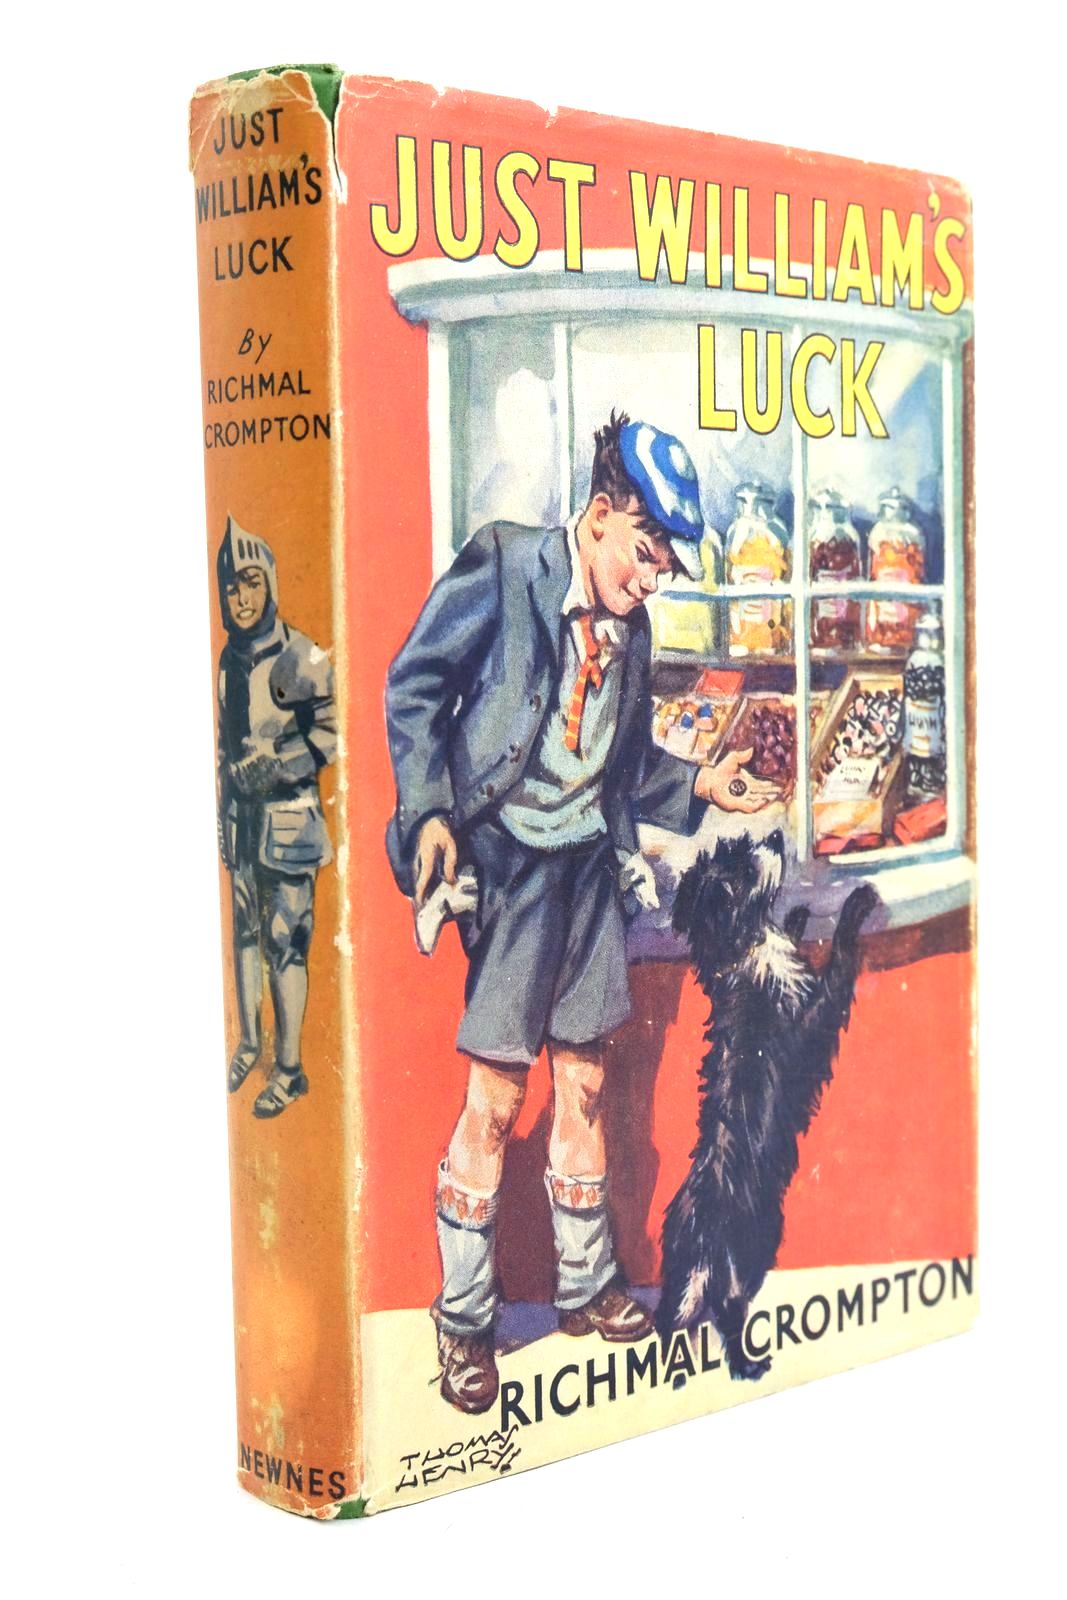 Photo of JUST WILLIAM'S LUCK written by Crompton, Richmal illustrated by Henry, Thomas published by George Newnes Ltd. (STOCK CODE: 1320819)  for sale by Stella & Rose's Books